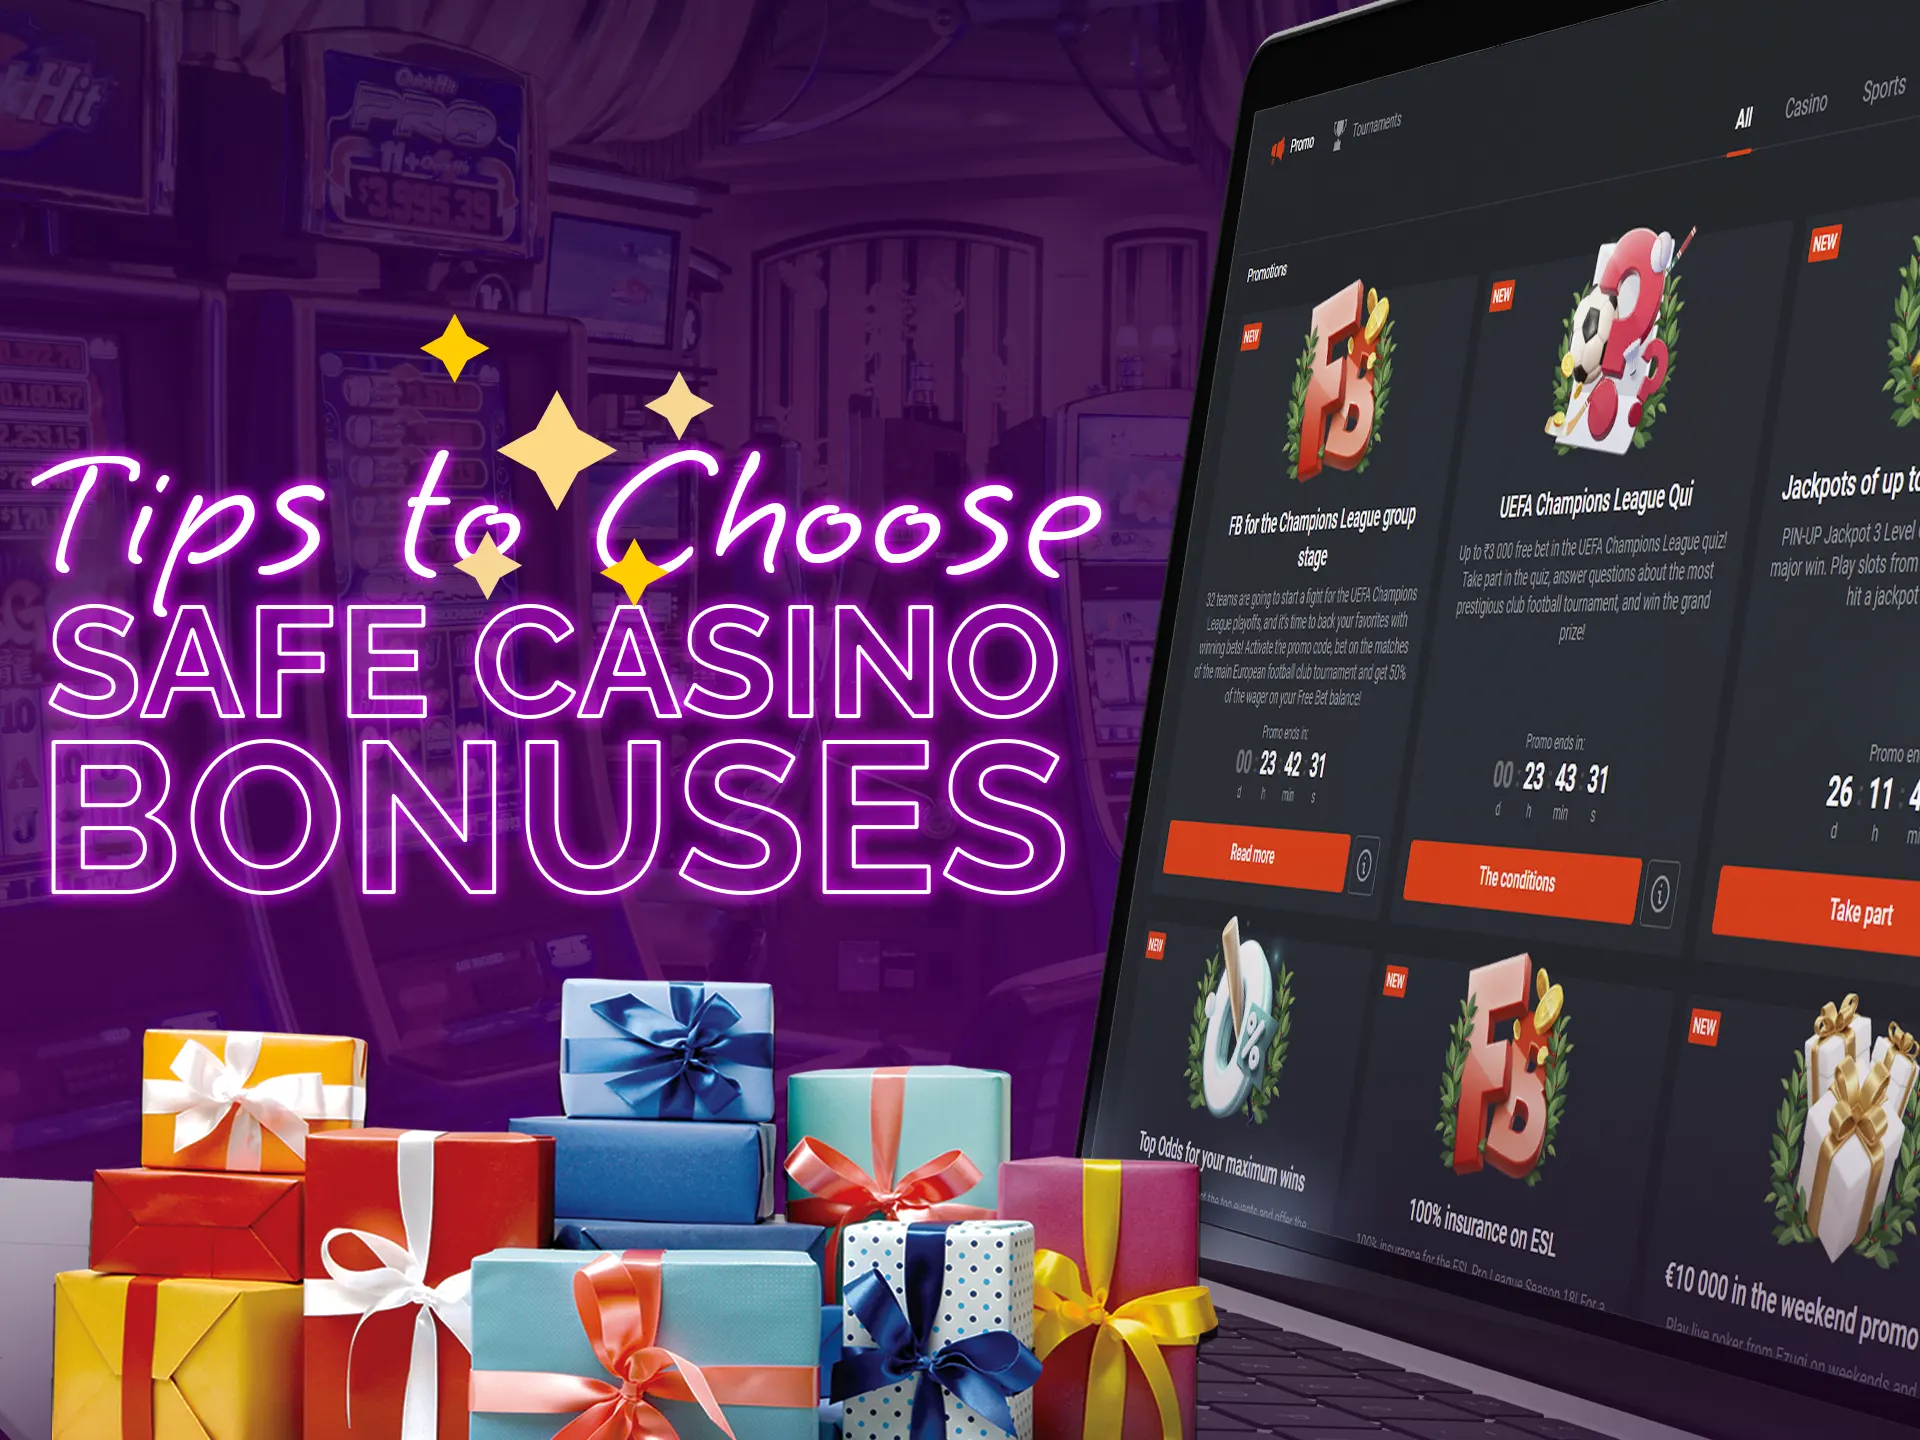 Choose casino bonuses wisely: pick licensed casinos, read terms, compare offers, match your playing style, and set a budget.